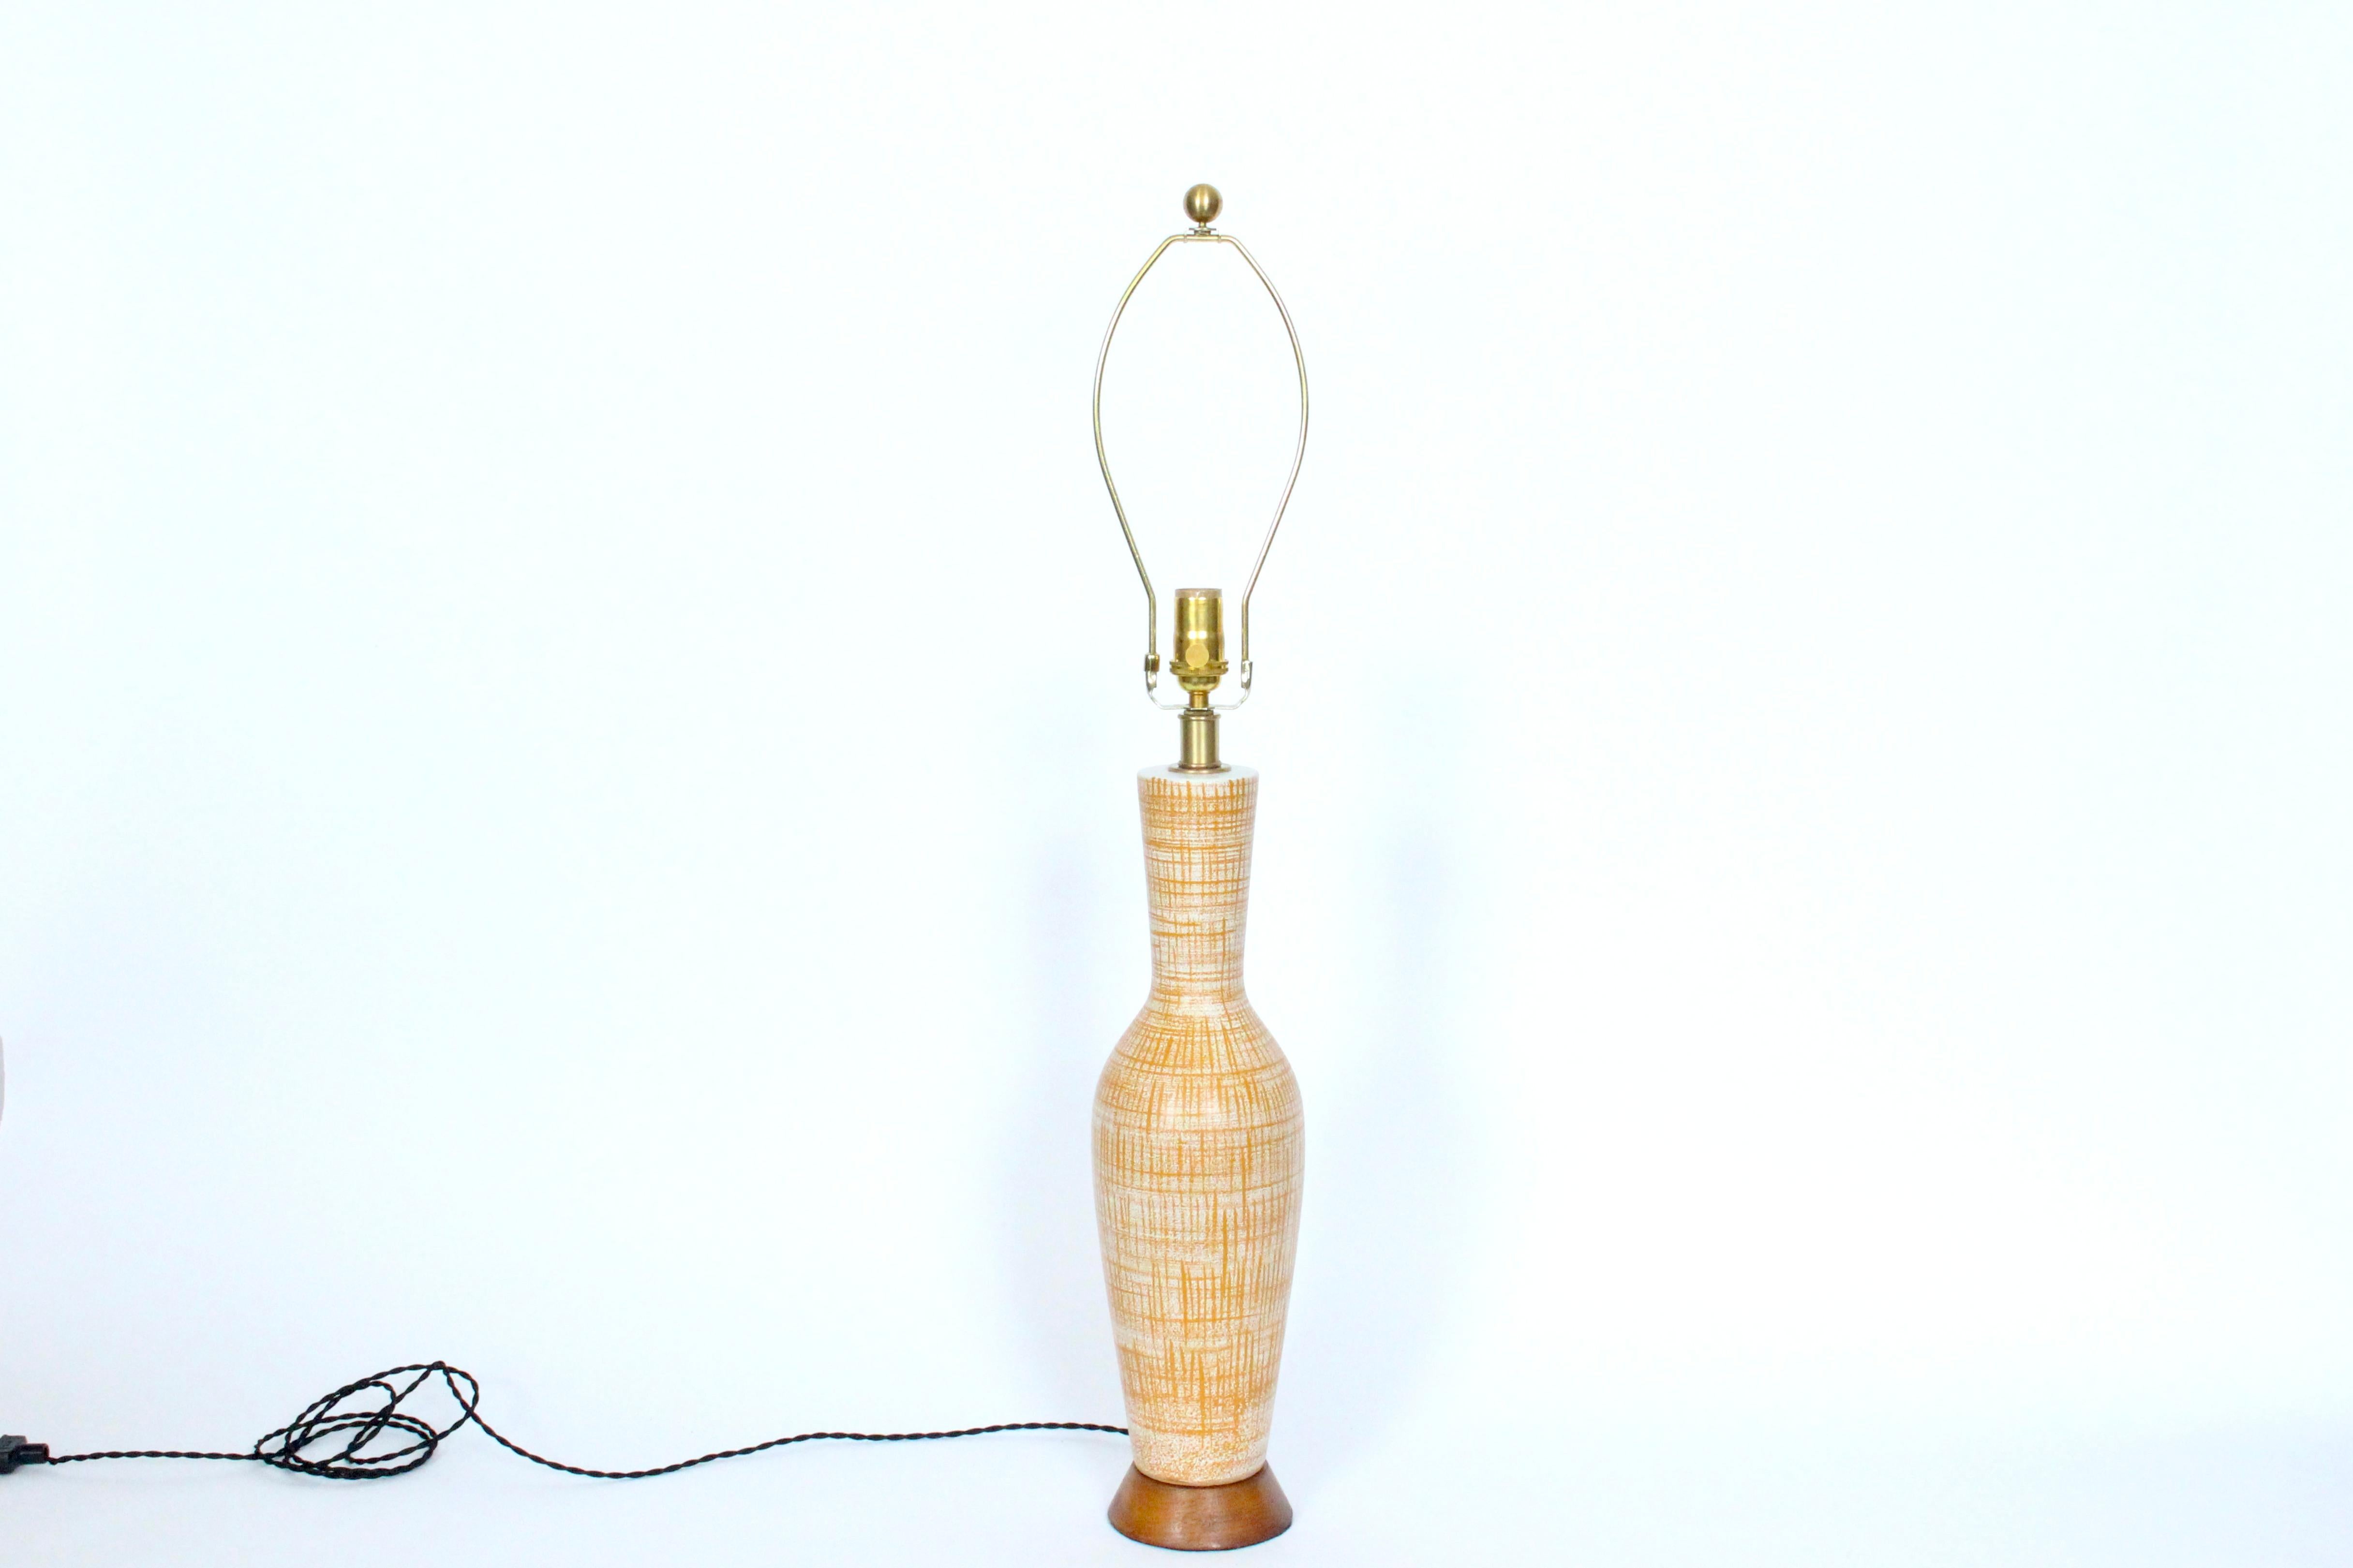 American Tall Design Technics Pottery White Table Lamp with Woven Rust Pattern, 1950's For Sale